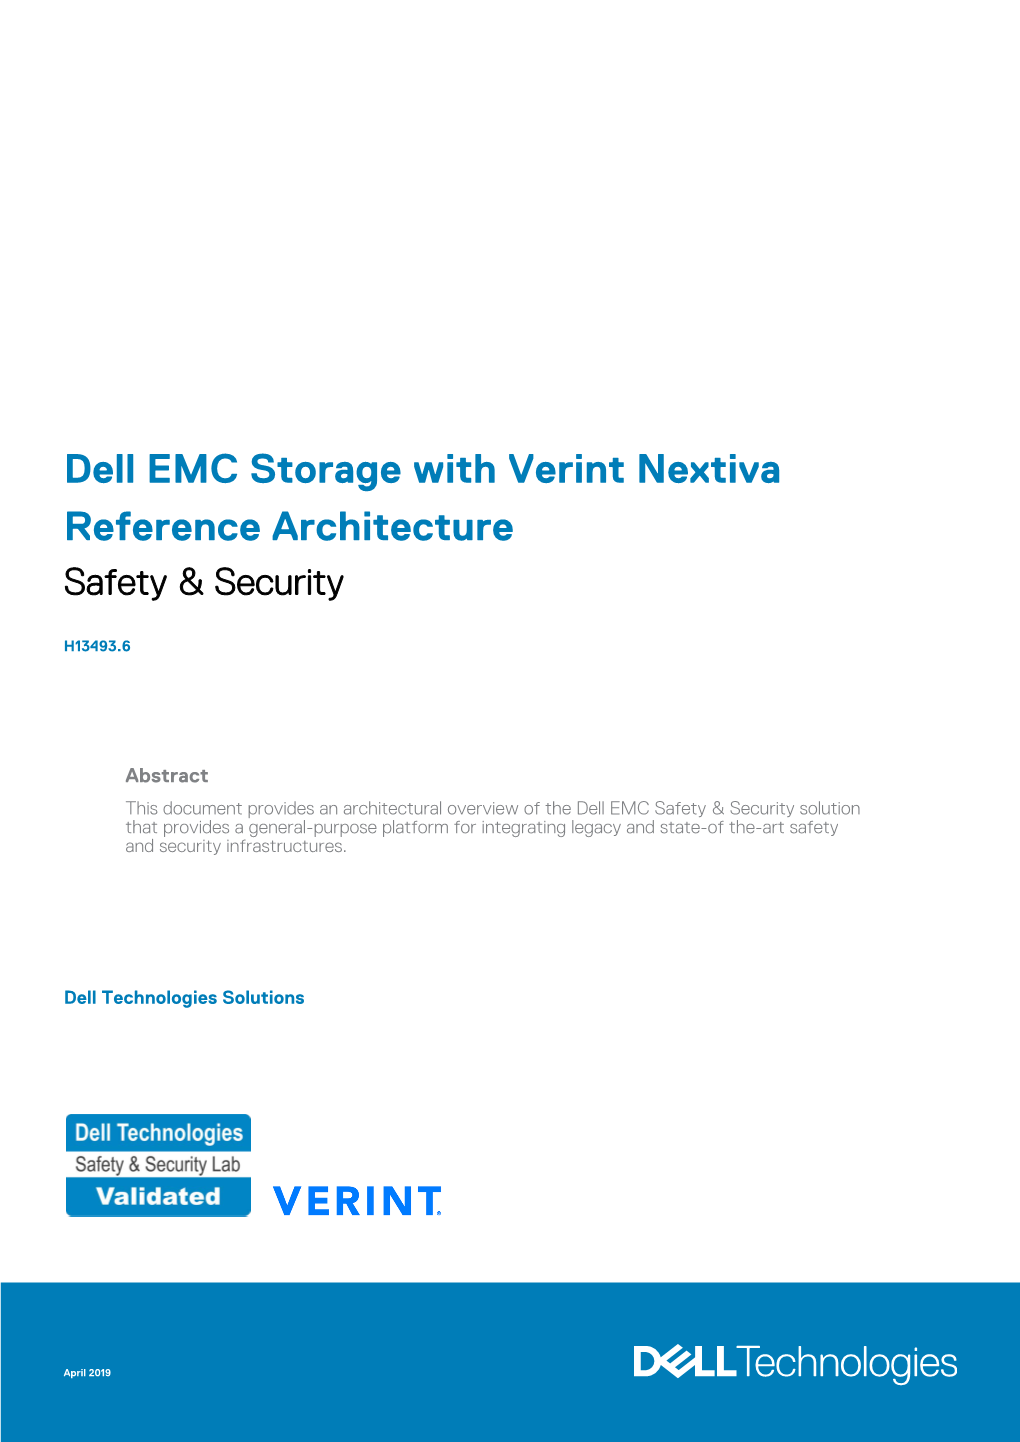 Dell EMC Storage with Verint Nextiva Reference Architecture Safety & Security